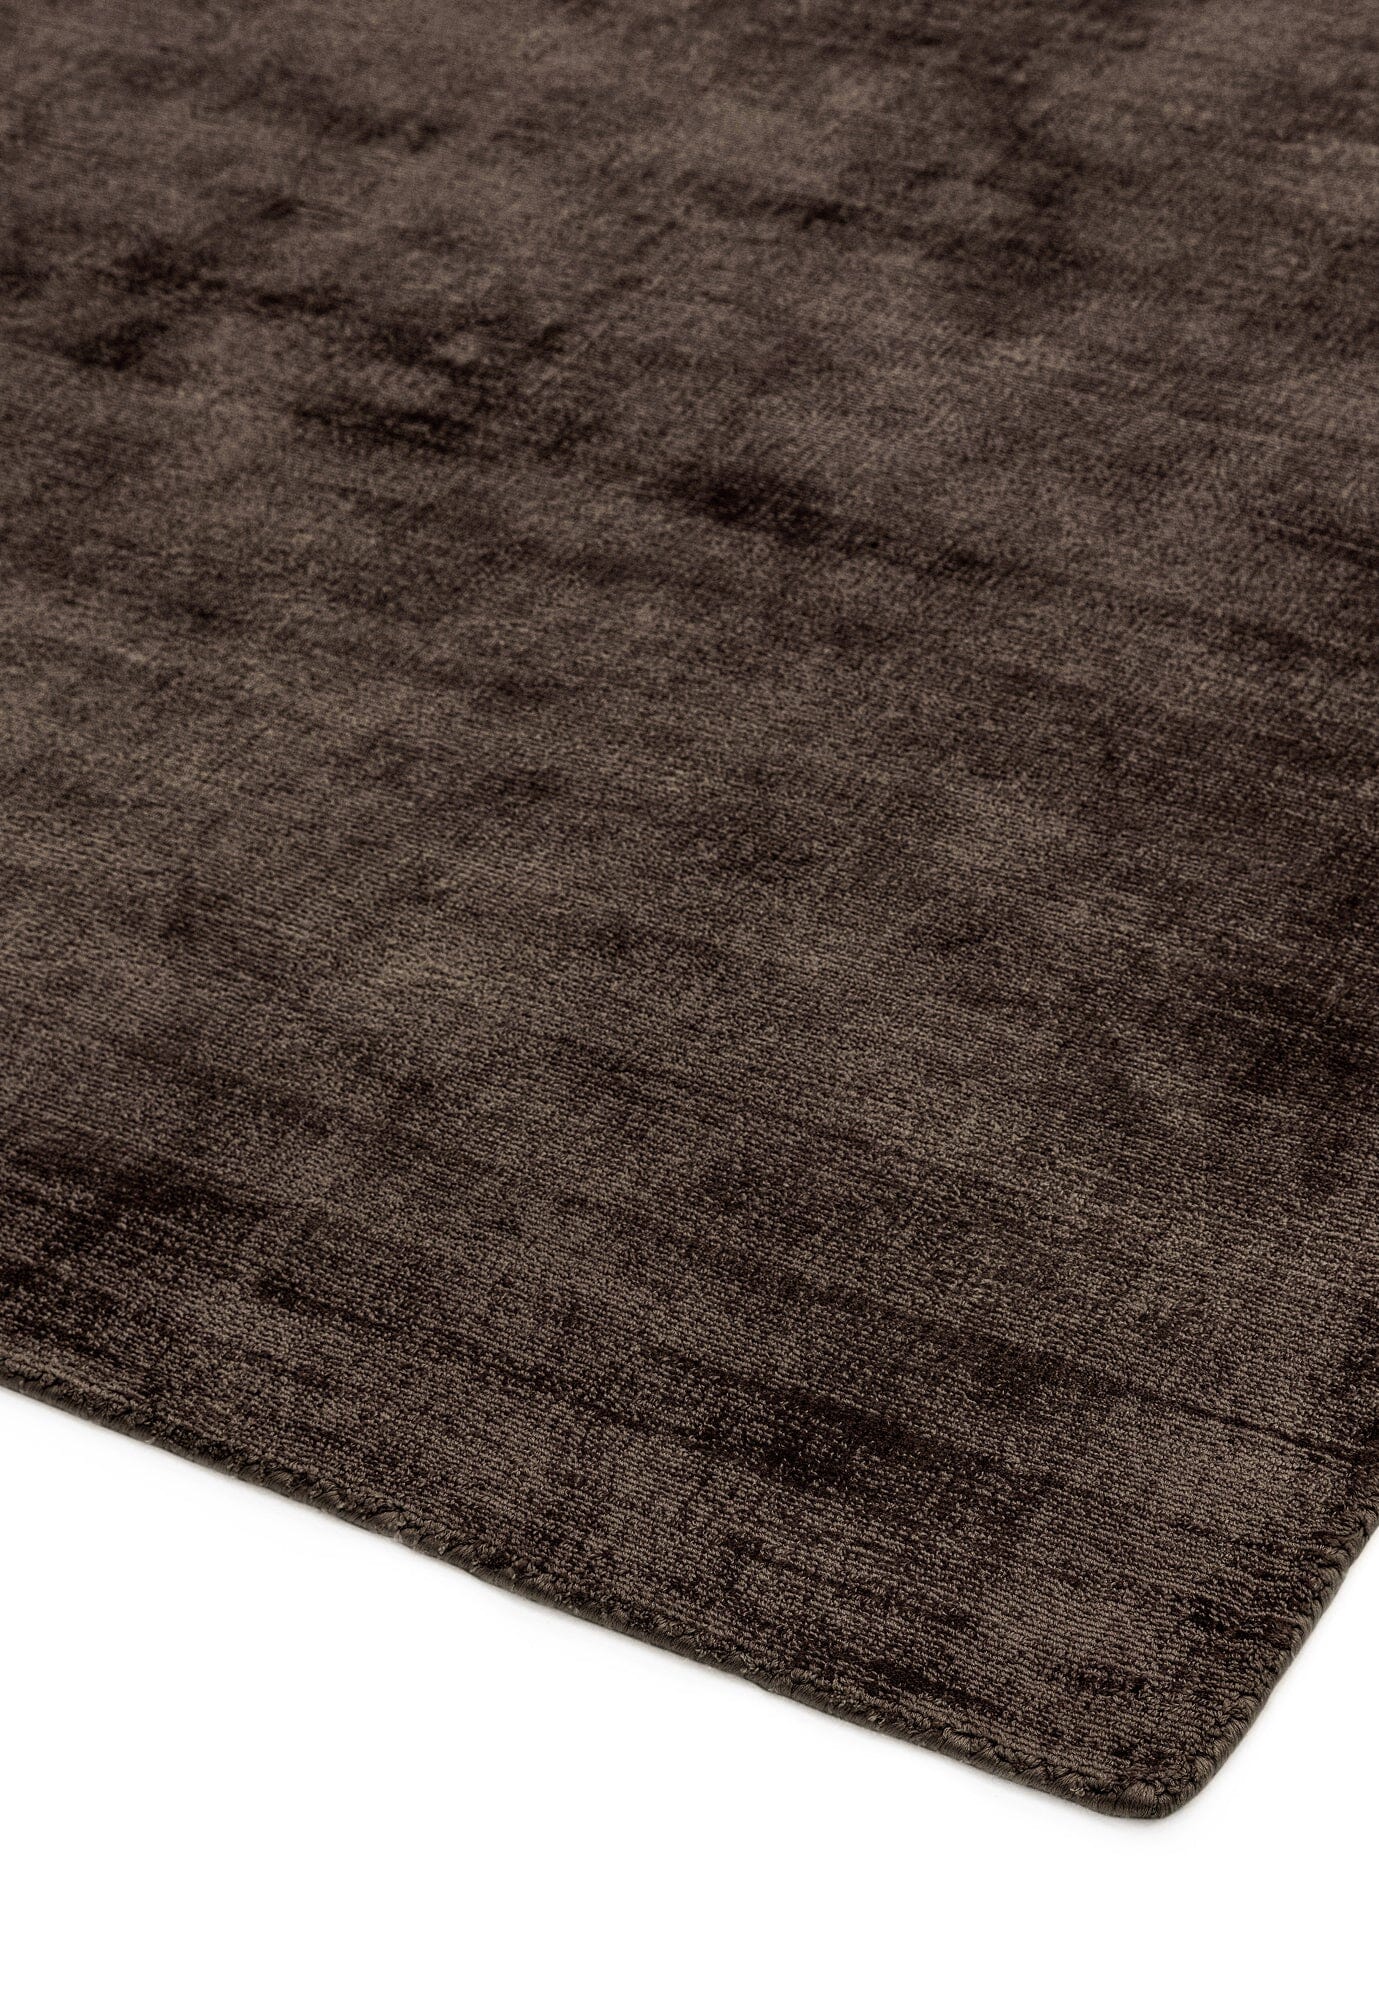  Asiatic Carpets-Asiatic Carpets Blade Hand Woven Rug Chocolate - 120 x 170cm-Brown 445 